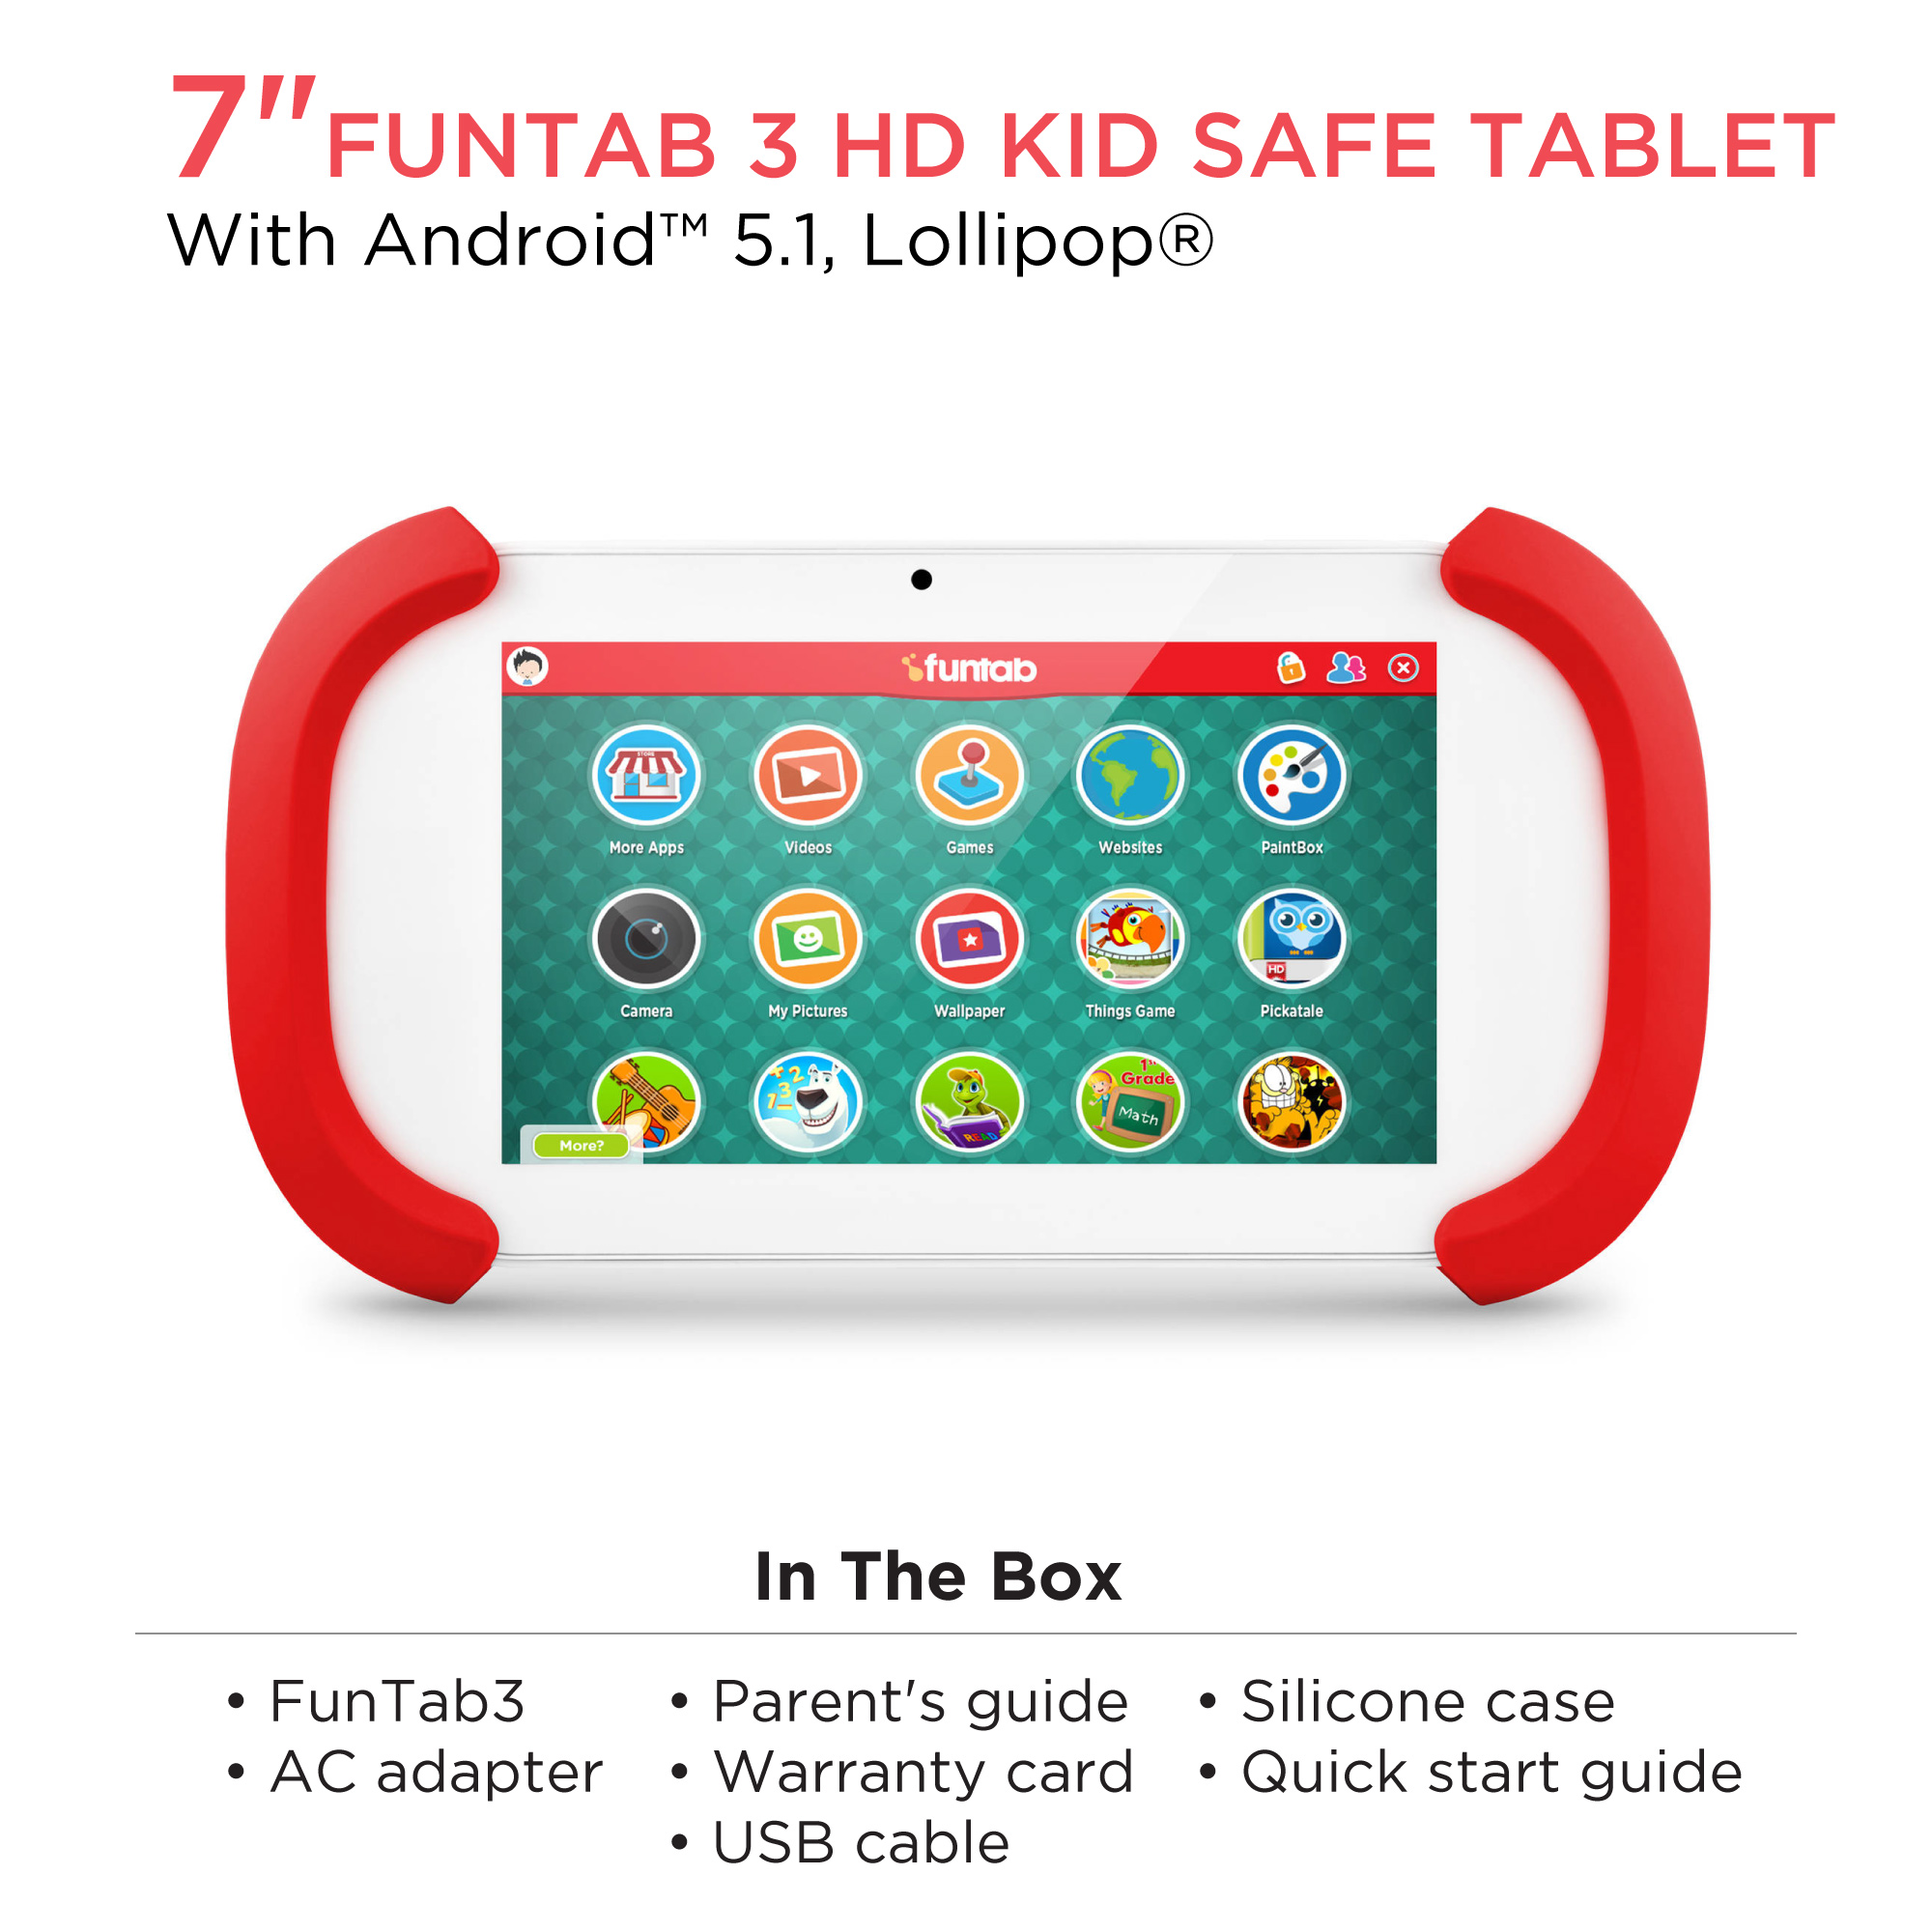 7" FunTab HD Kid-Safe Tablet with Android 5.1 (Lollipop) - image 3 of 6